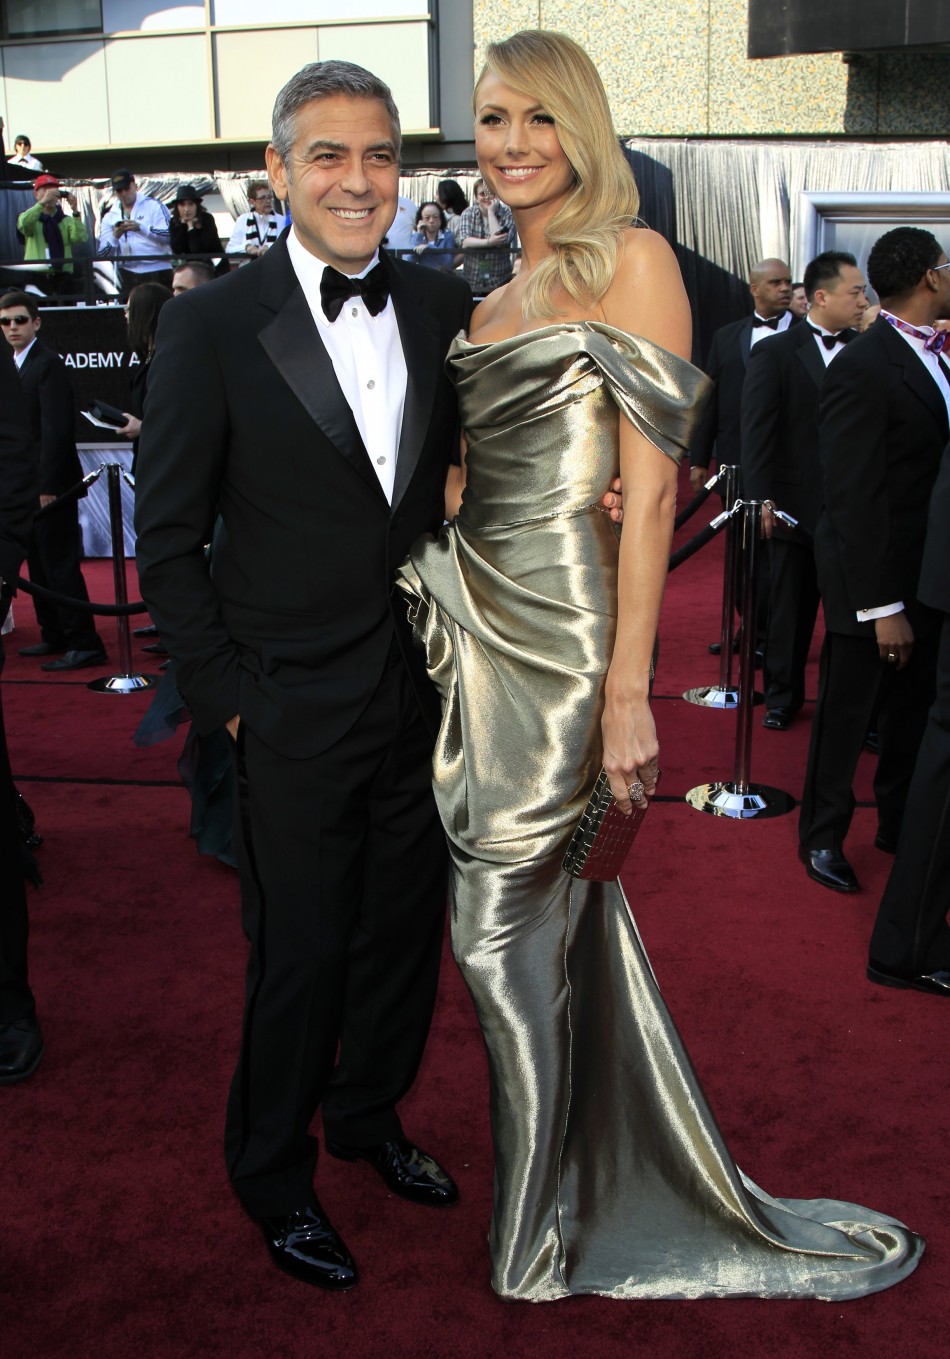 Actor George Clooney and girlfriend Stacy Keibler pose on the red carpet as they arrive at the 84th Academy Awards in Hollywood